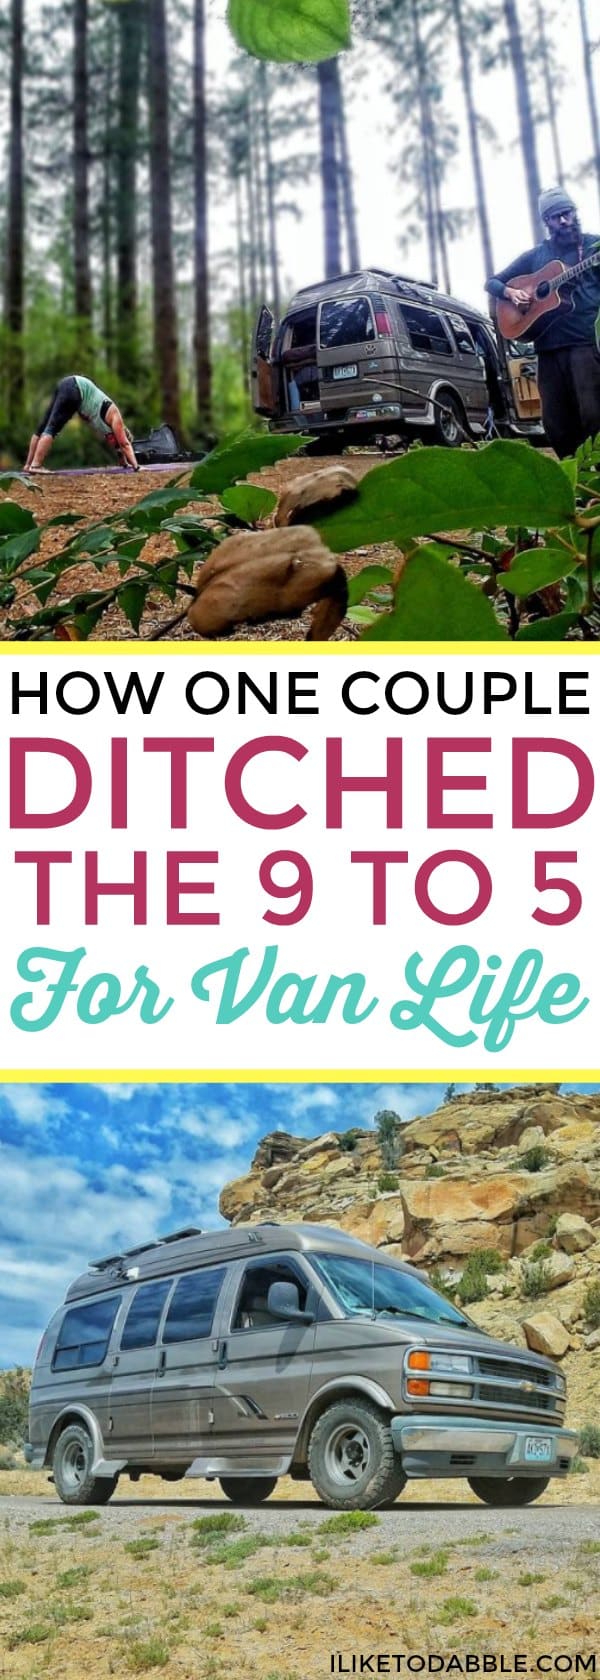 Background of women doing a yoga pose and man playing guitar with a van in the woods with the title of the article in the front titled "How one couple ditched the 9 to 5 for van life. Van life. Travel full time. Van lifers. Van life movement. Life of adventure" #vanlife #ditchthe9to5 #vanlifer #vanlifediaries #travelfulltime #vanlifemovement